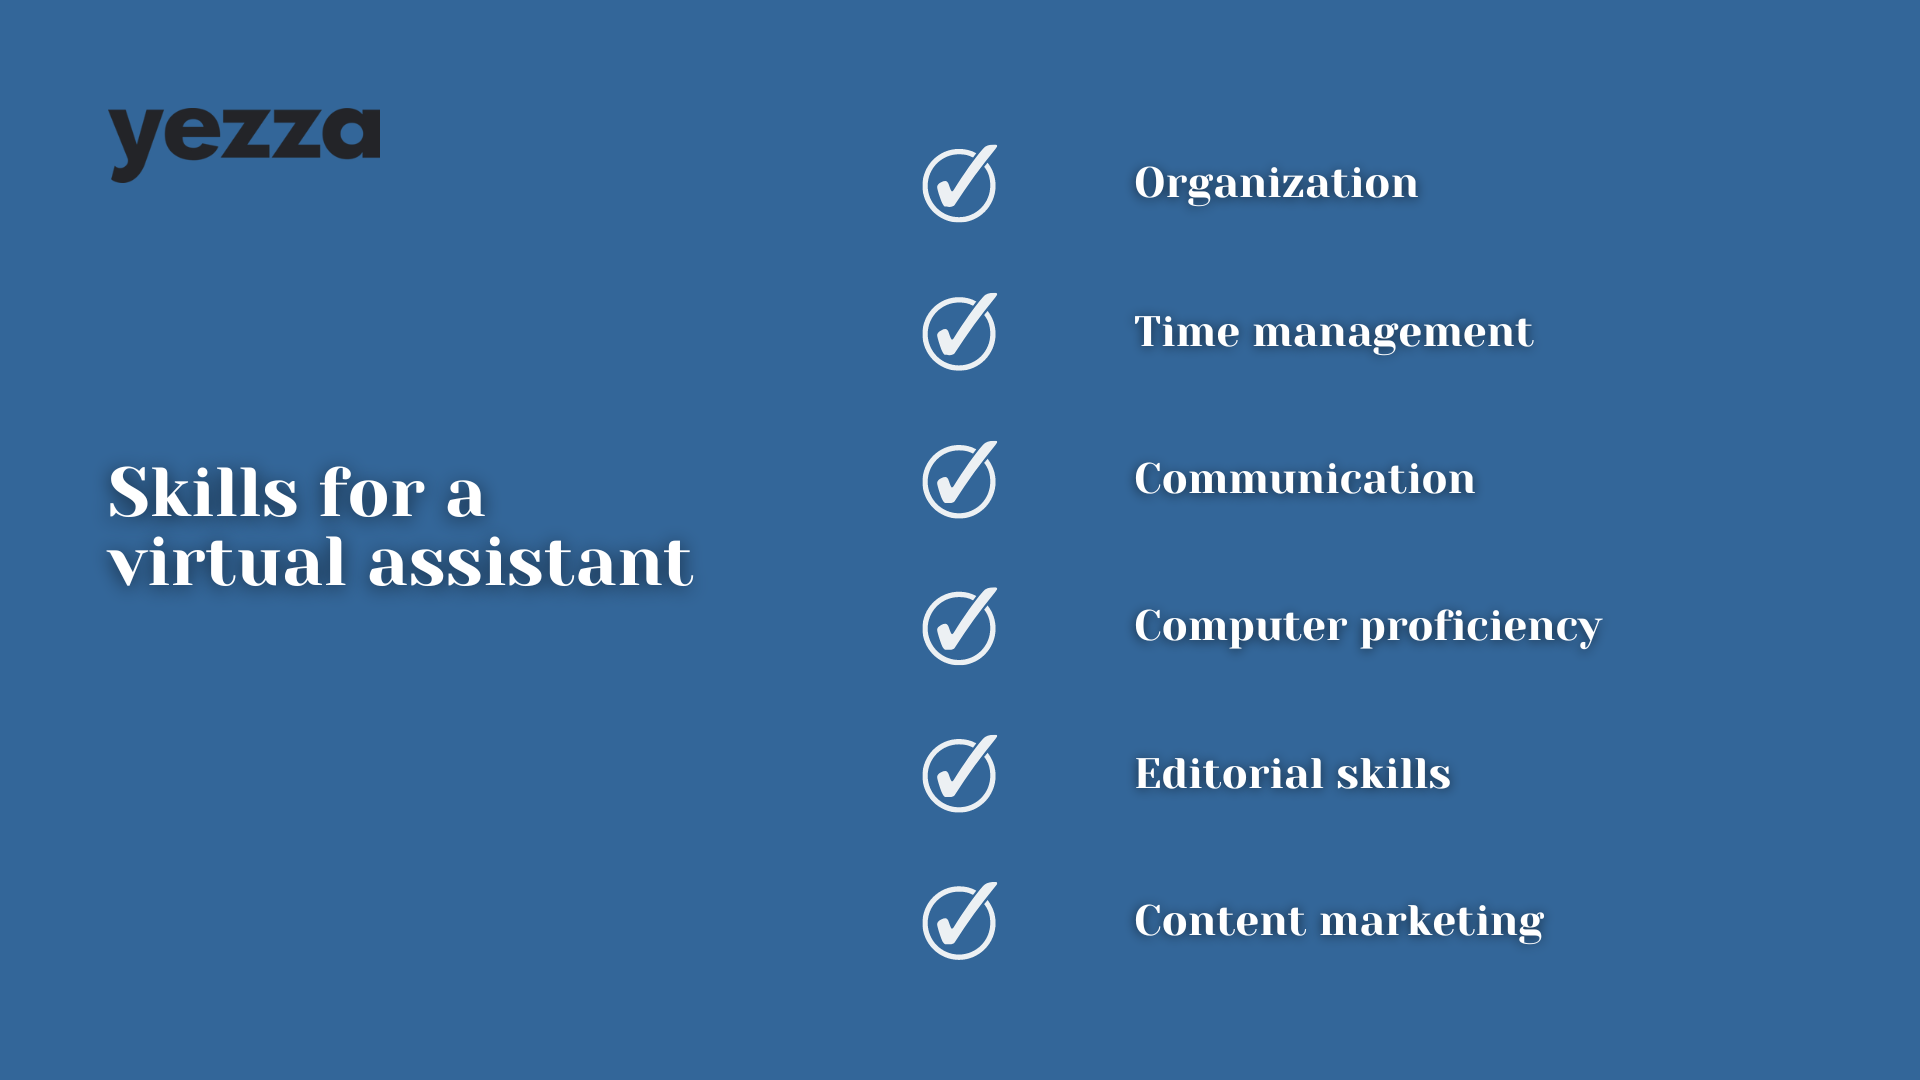 What skills are needed to become a virtual assistant?